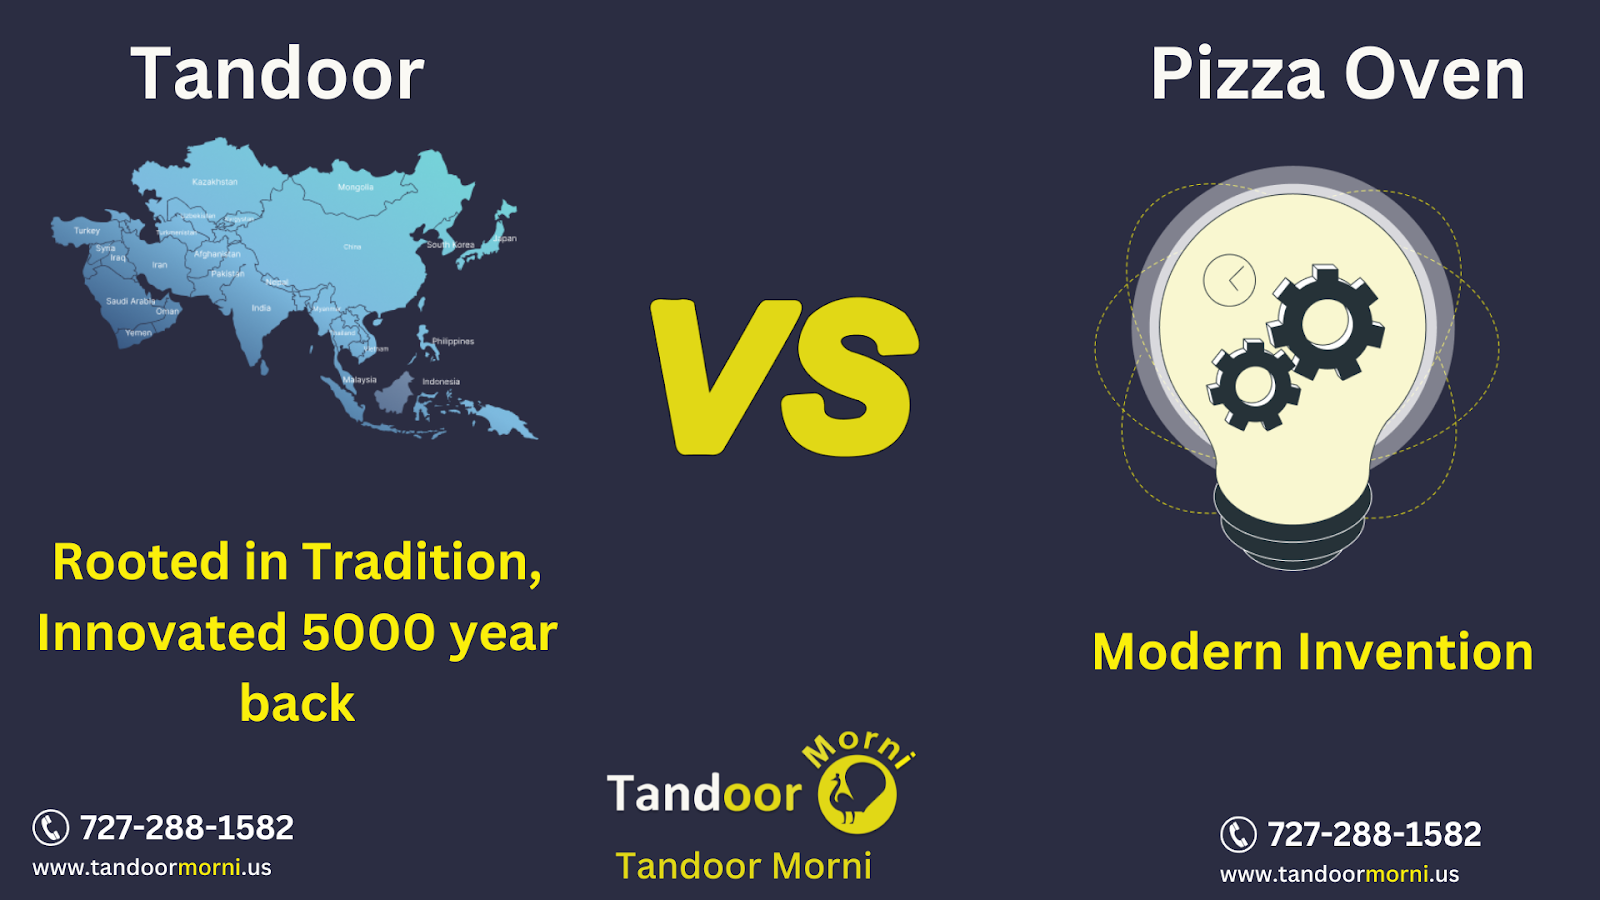 The key differences between the Tandoor vs Pizza Oven — which are relatively new technologies with origins in 5,000-year-old tradition and modern technology, respectively—are shown in this image.